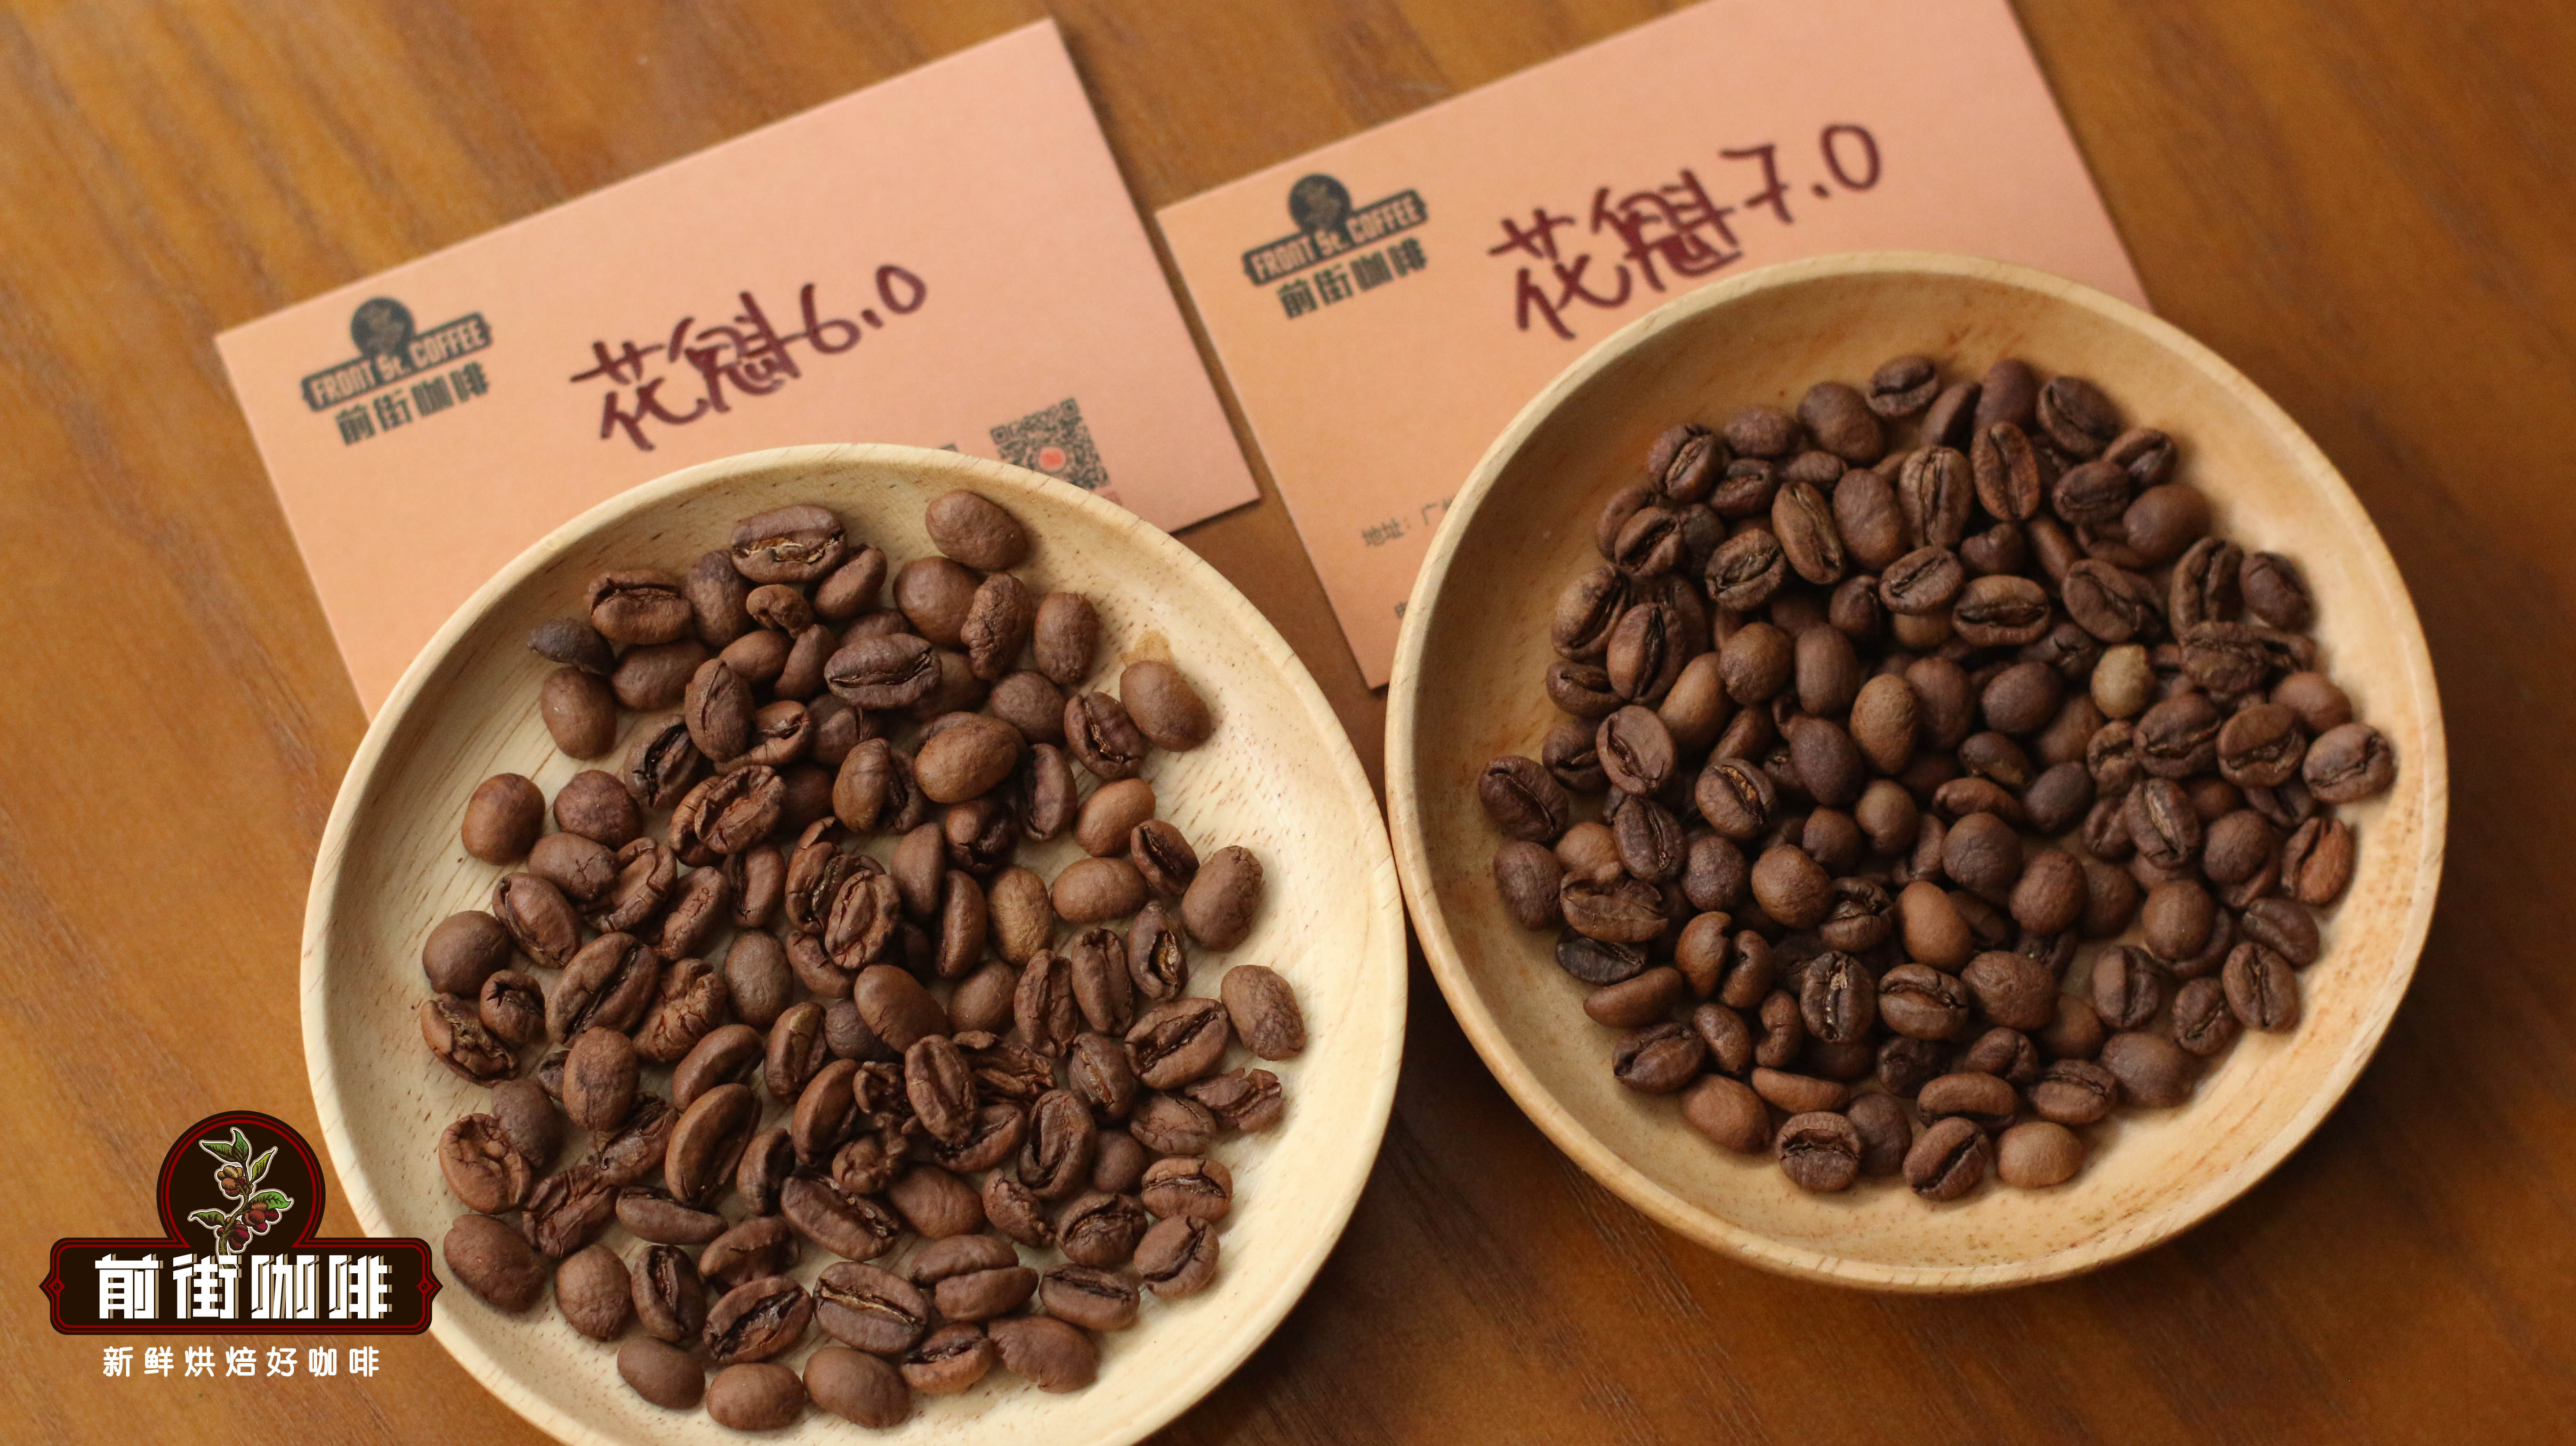 Which continent is the producing area of Sidamo? what is the flavor of coffee beans in the new season of 2023? is it delicious?